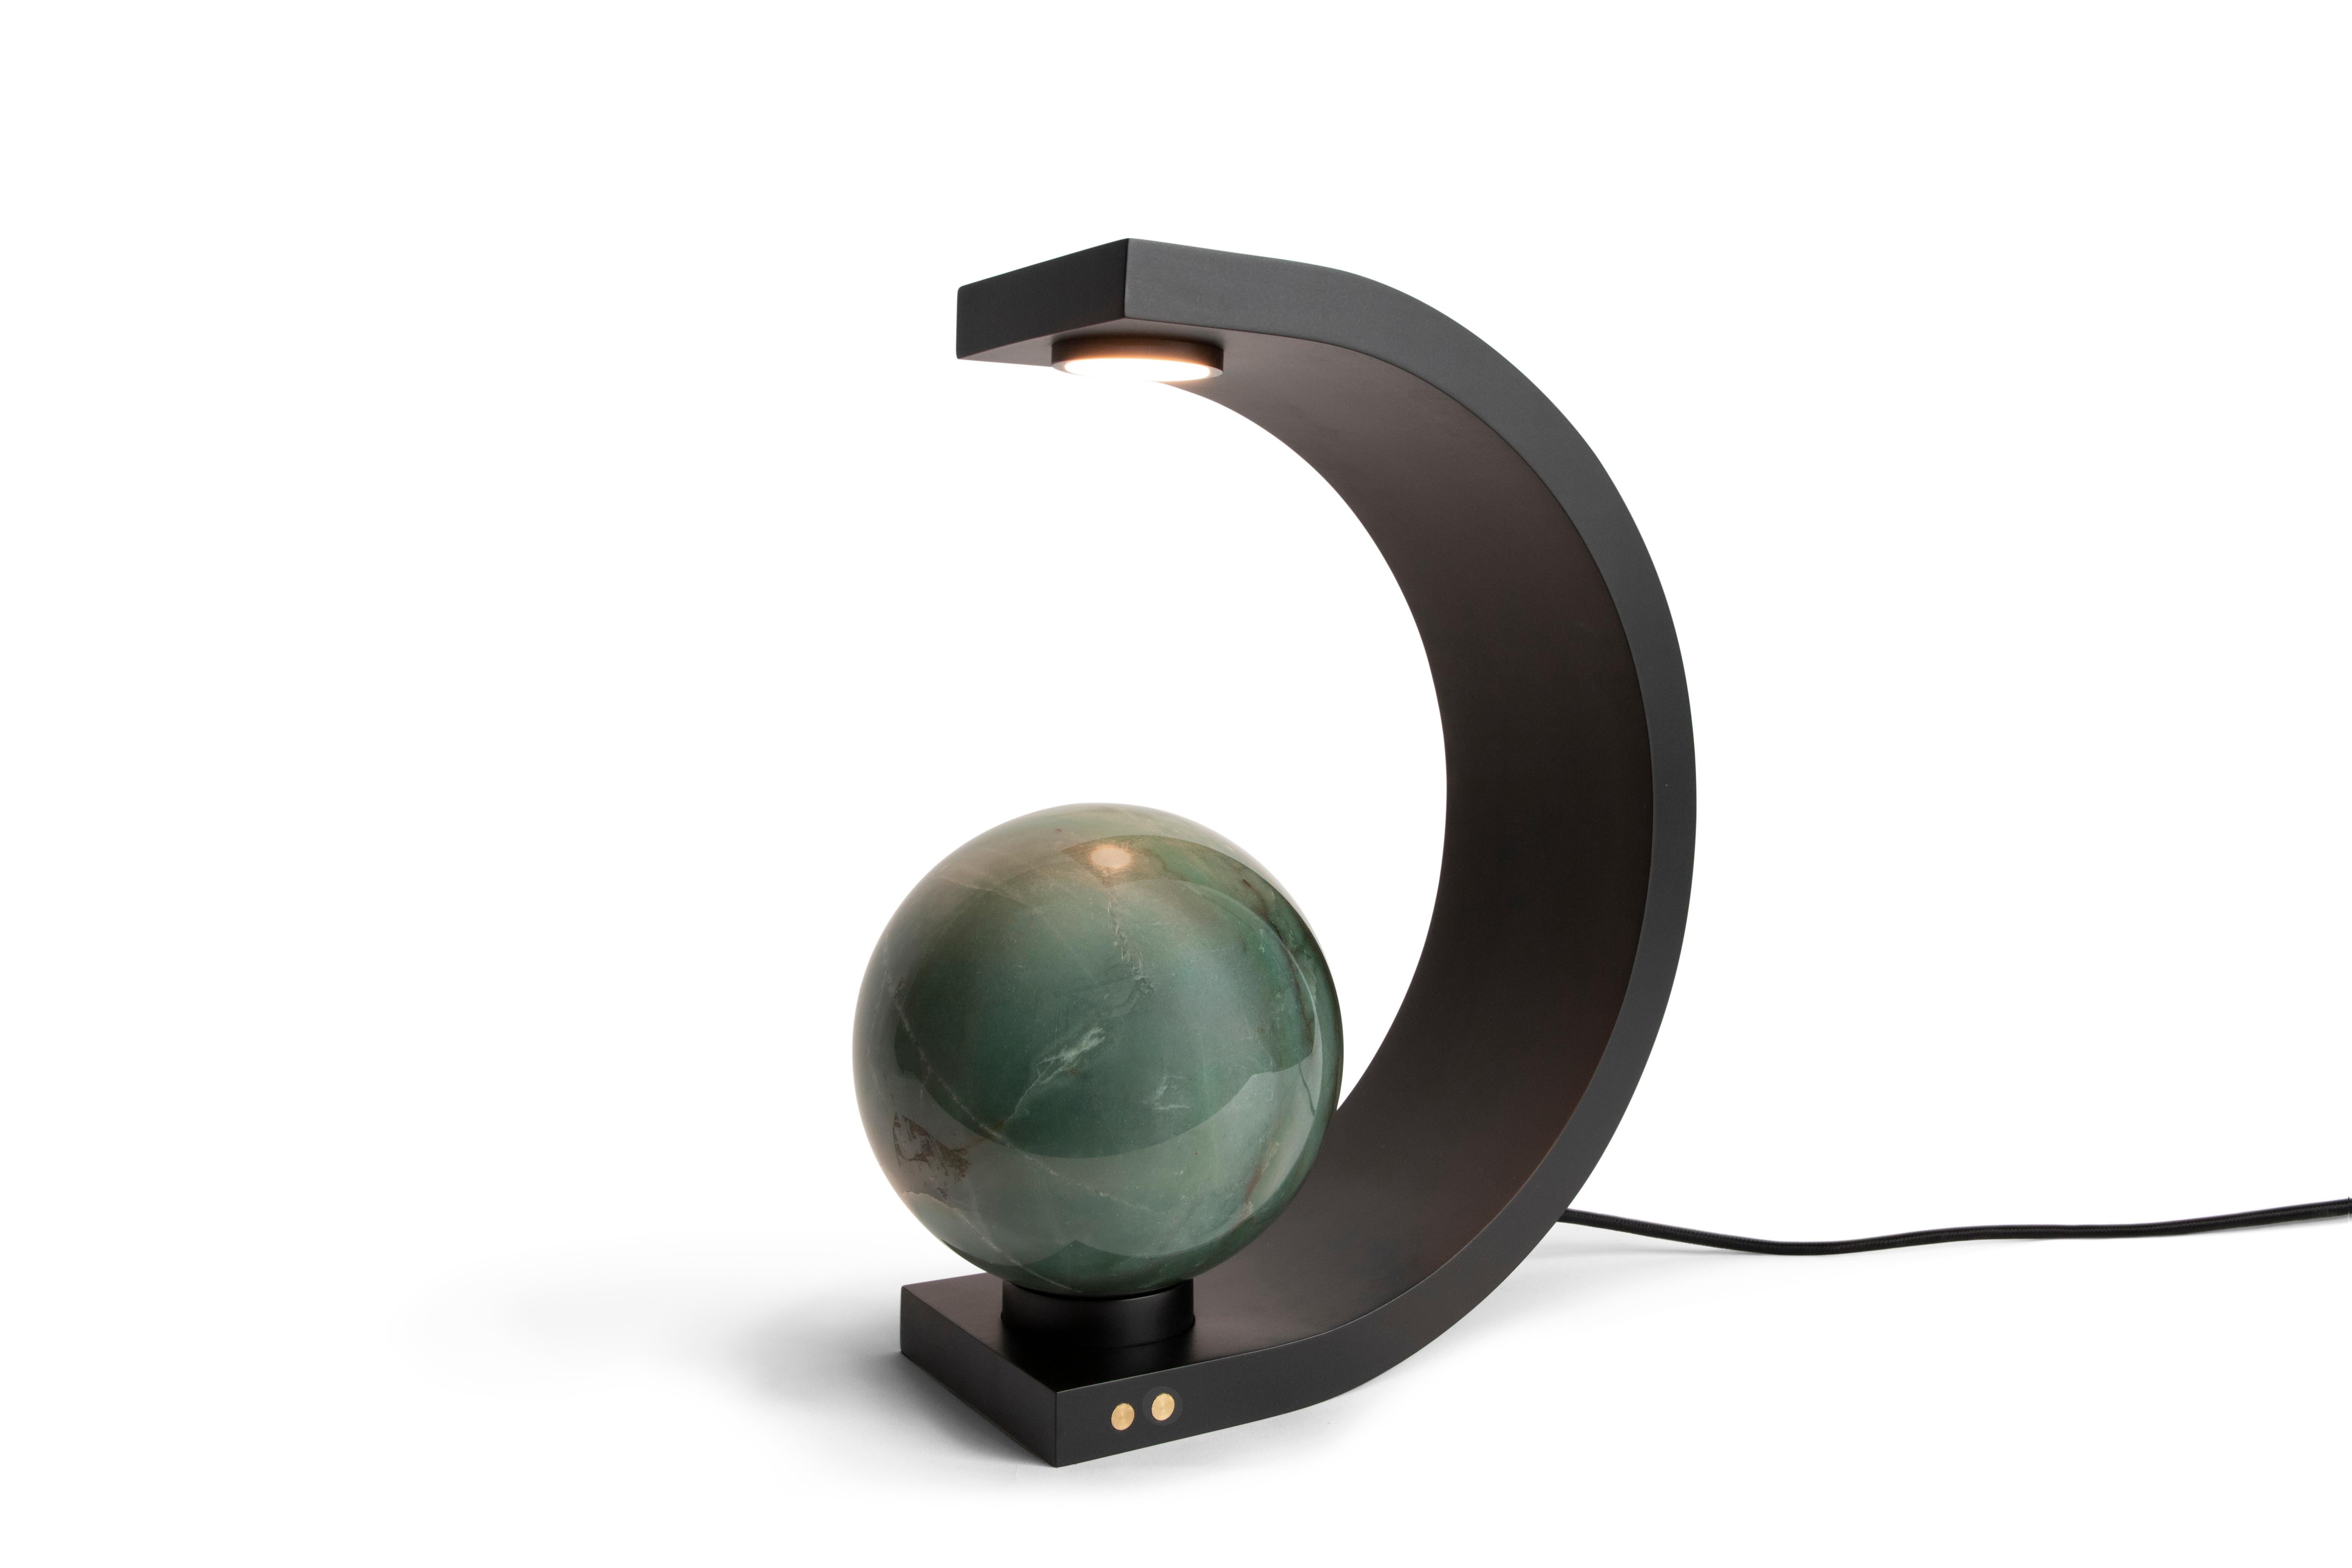 Organic Modern Hotai I Table Lamp by Sten Studio, Represented by Tuleste Factory